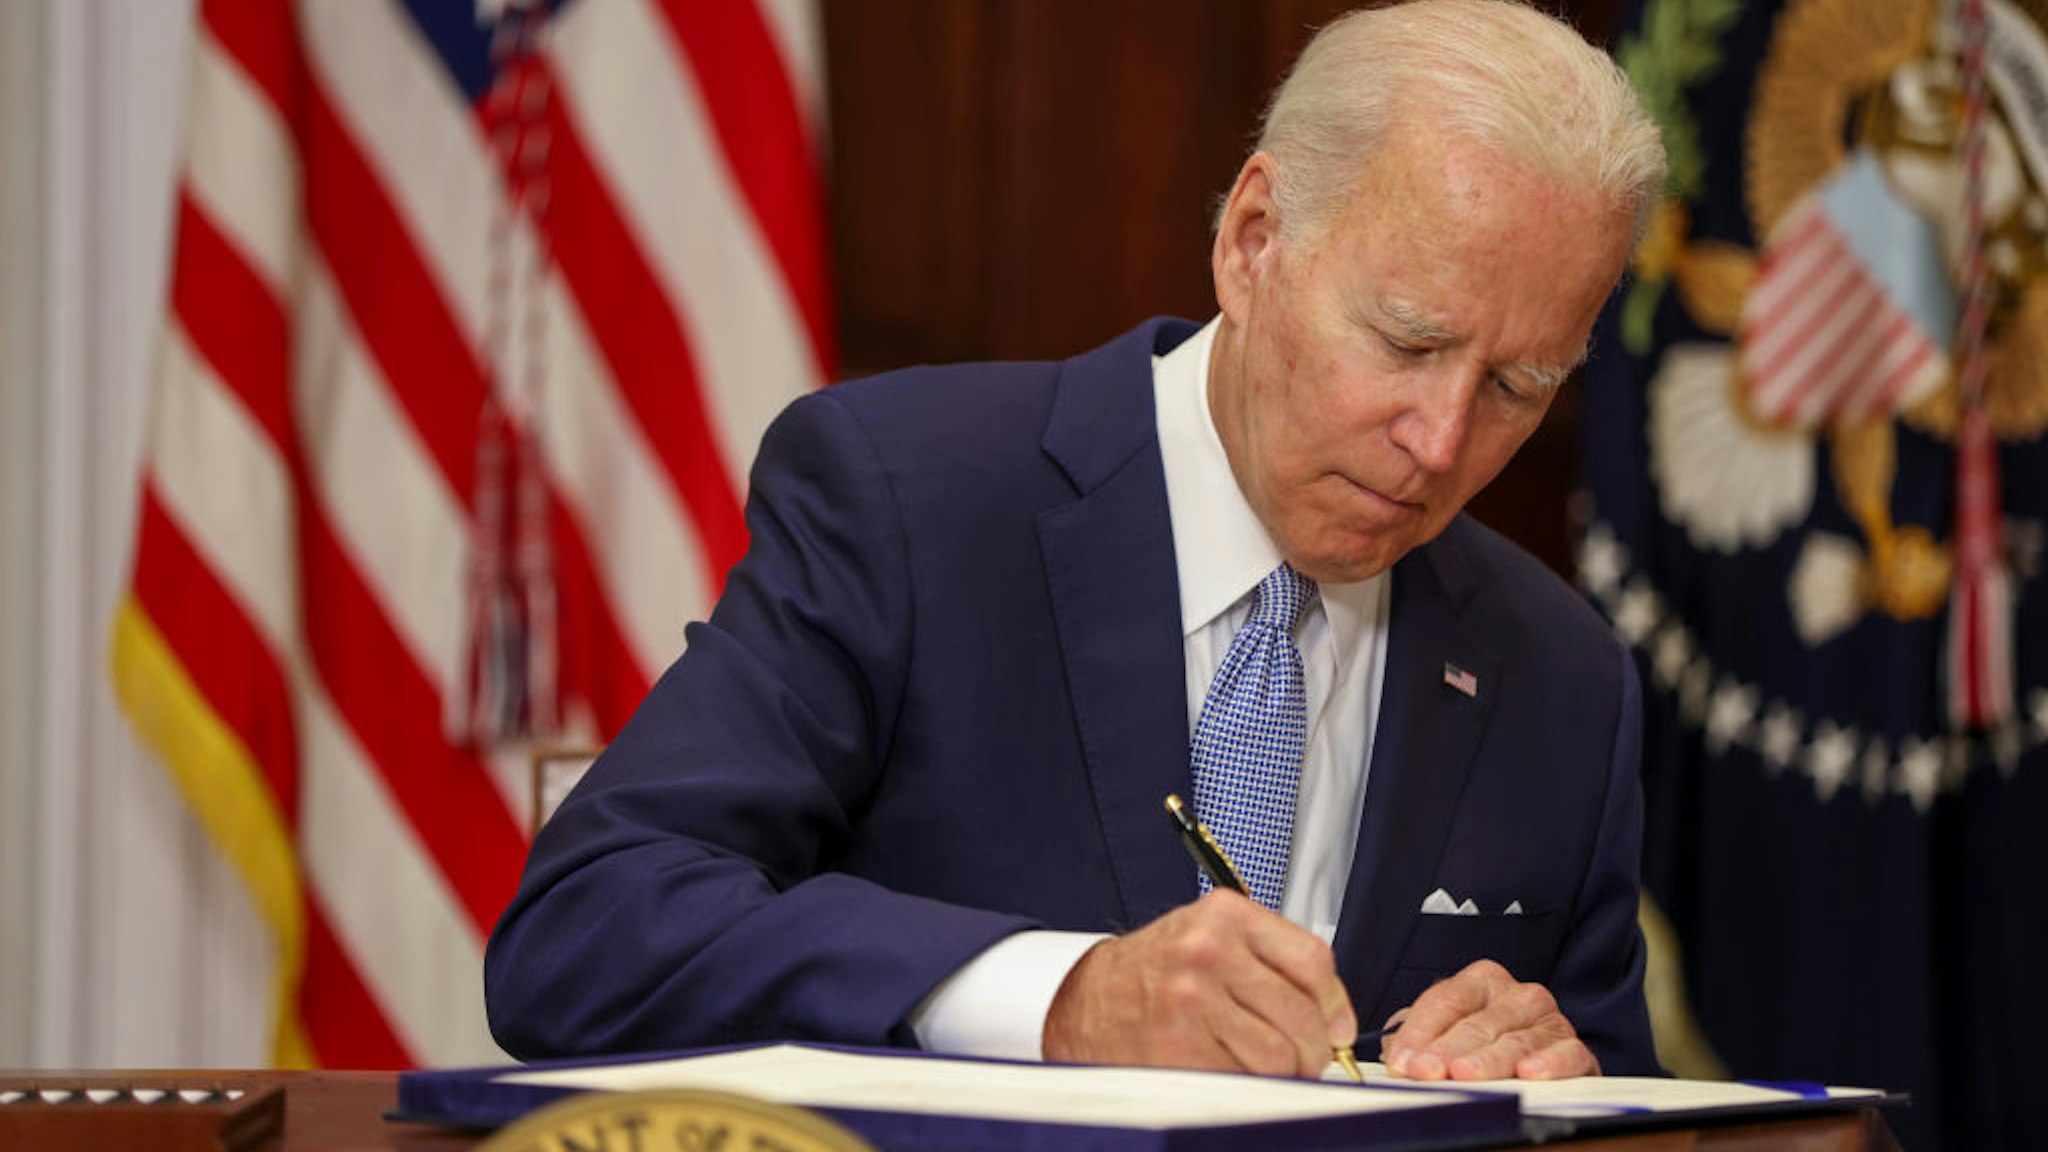 WASHINGTON, DC - JUNE 25: U.S. President Joe Biden signs the Bipartisan Safer Communities Act into law in the Roosevelt Room of the White House on June 25, 2022 in Washington, DC. The legislation is the first new gun regulations passed by Congress in more than 30 years.